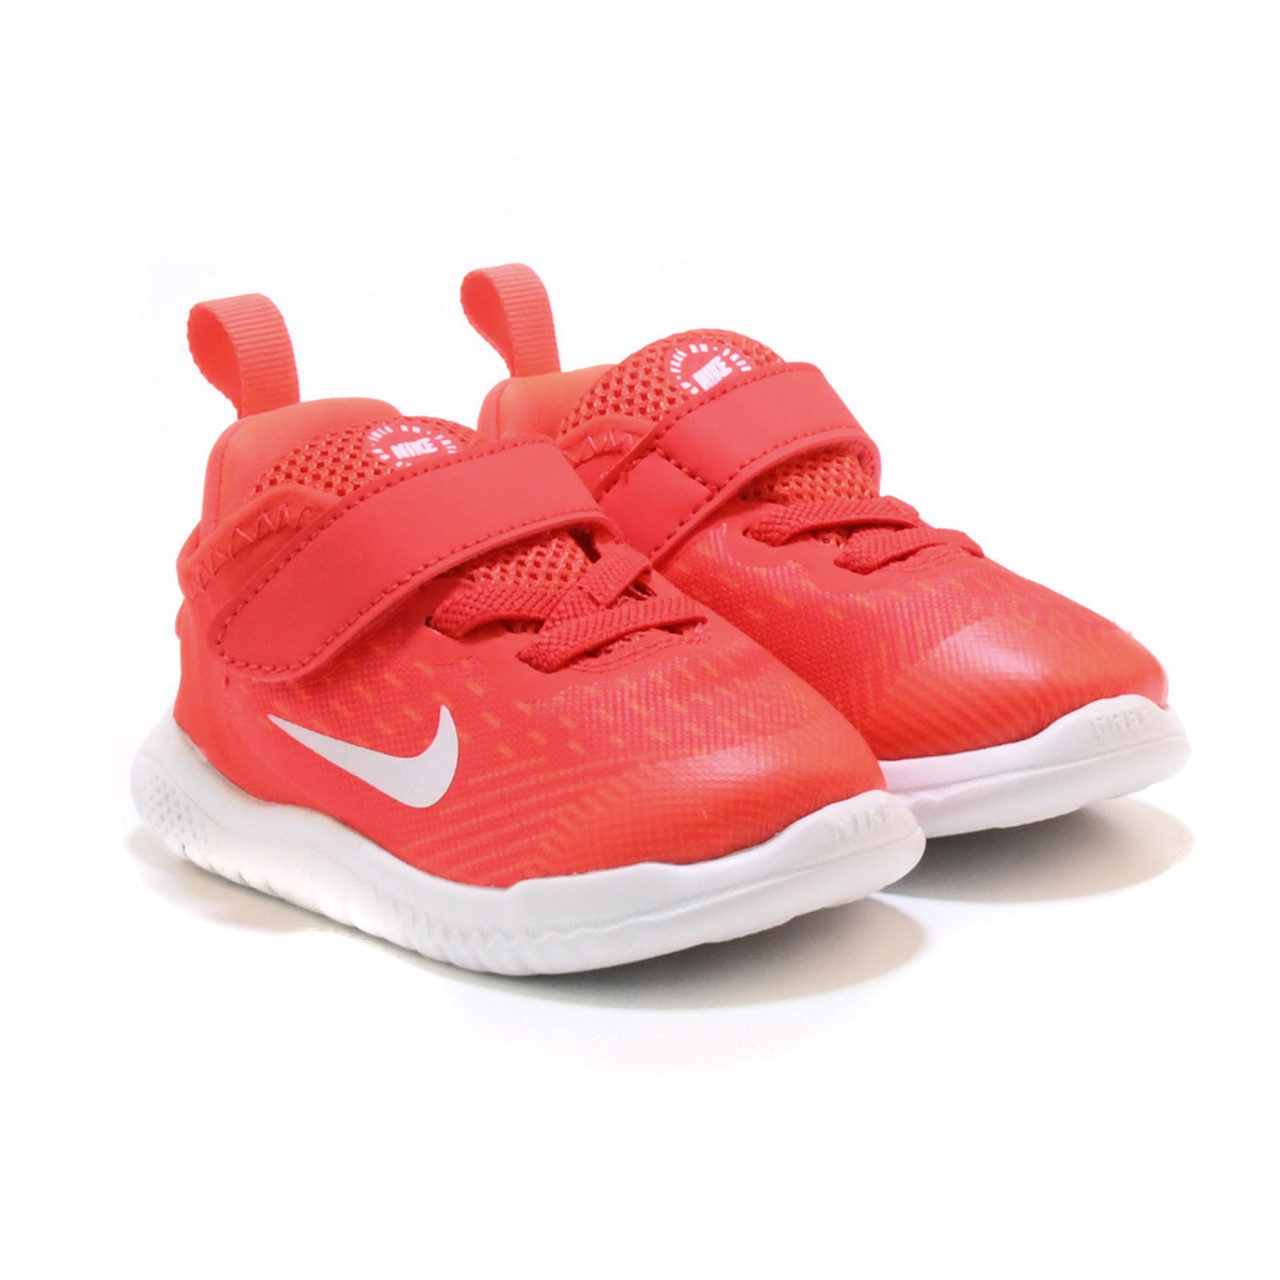 NIKE Free 5.0 - Baby Collection | Hera +